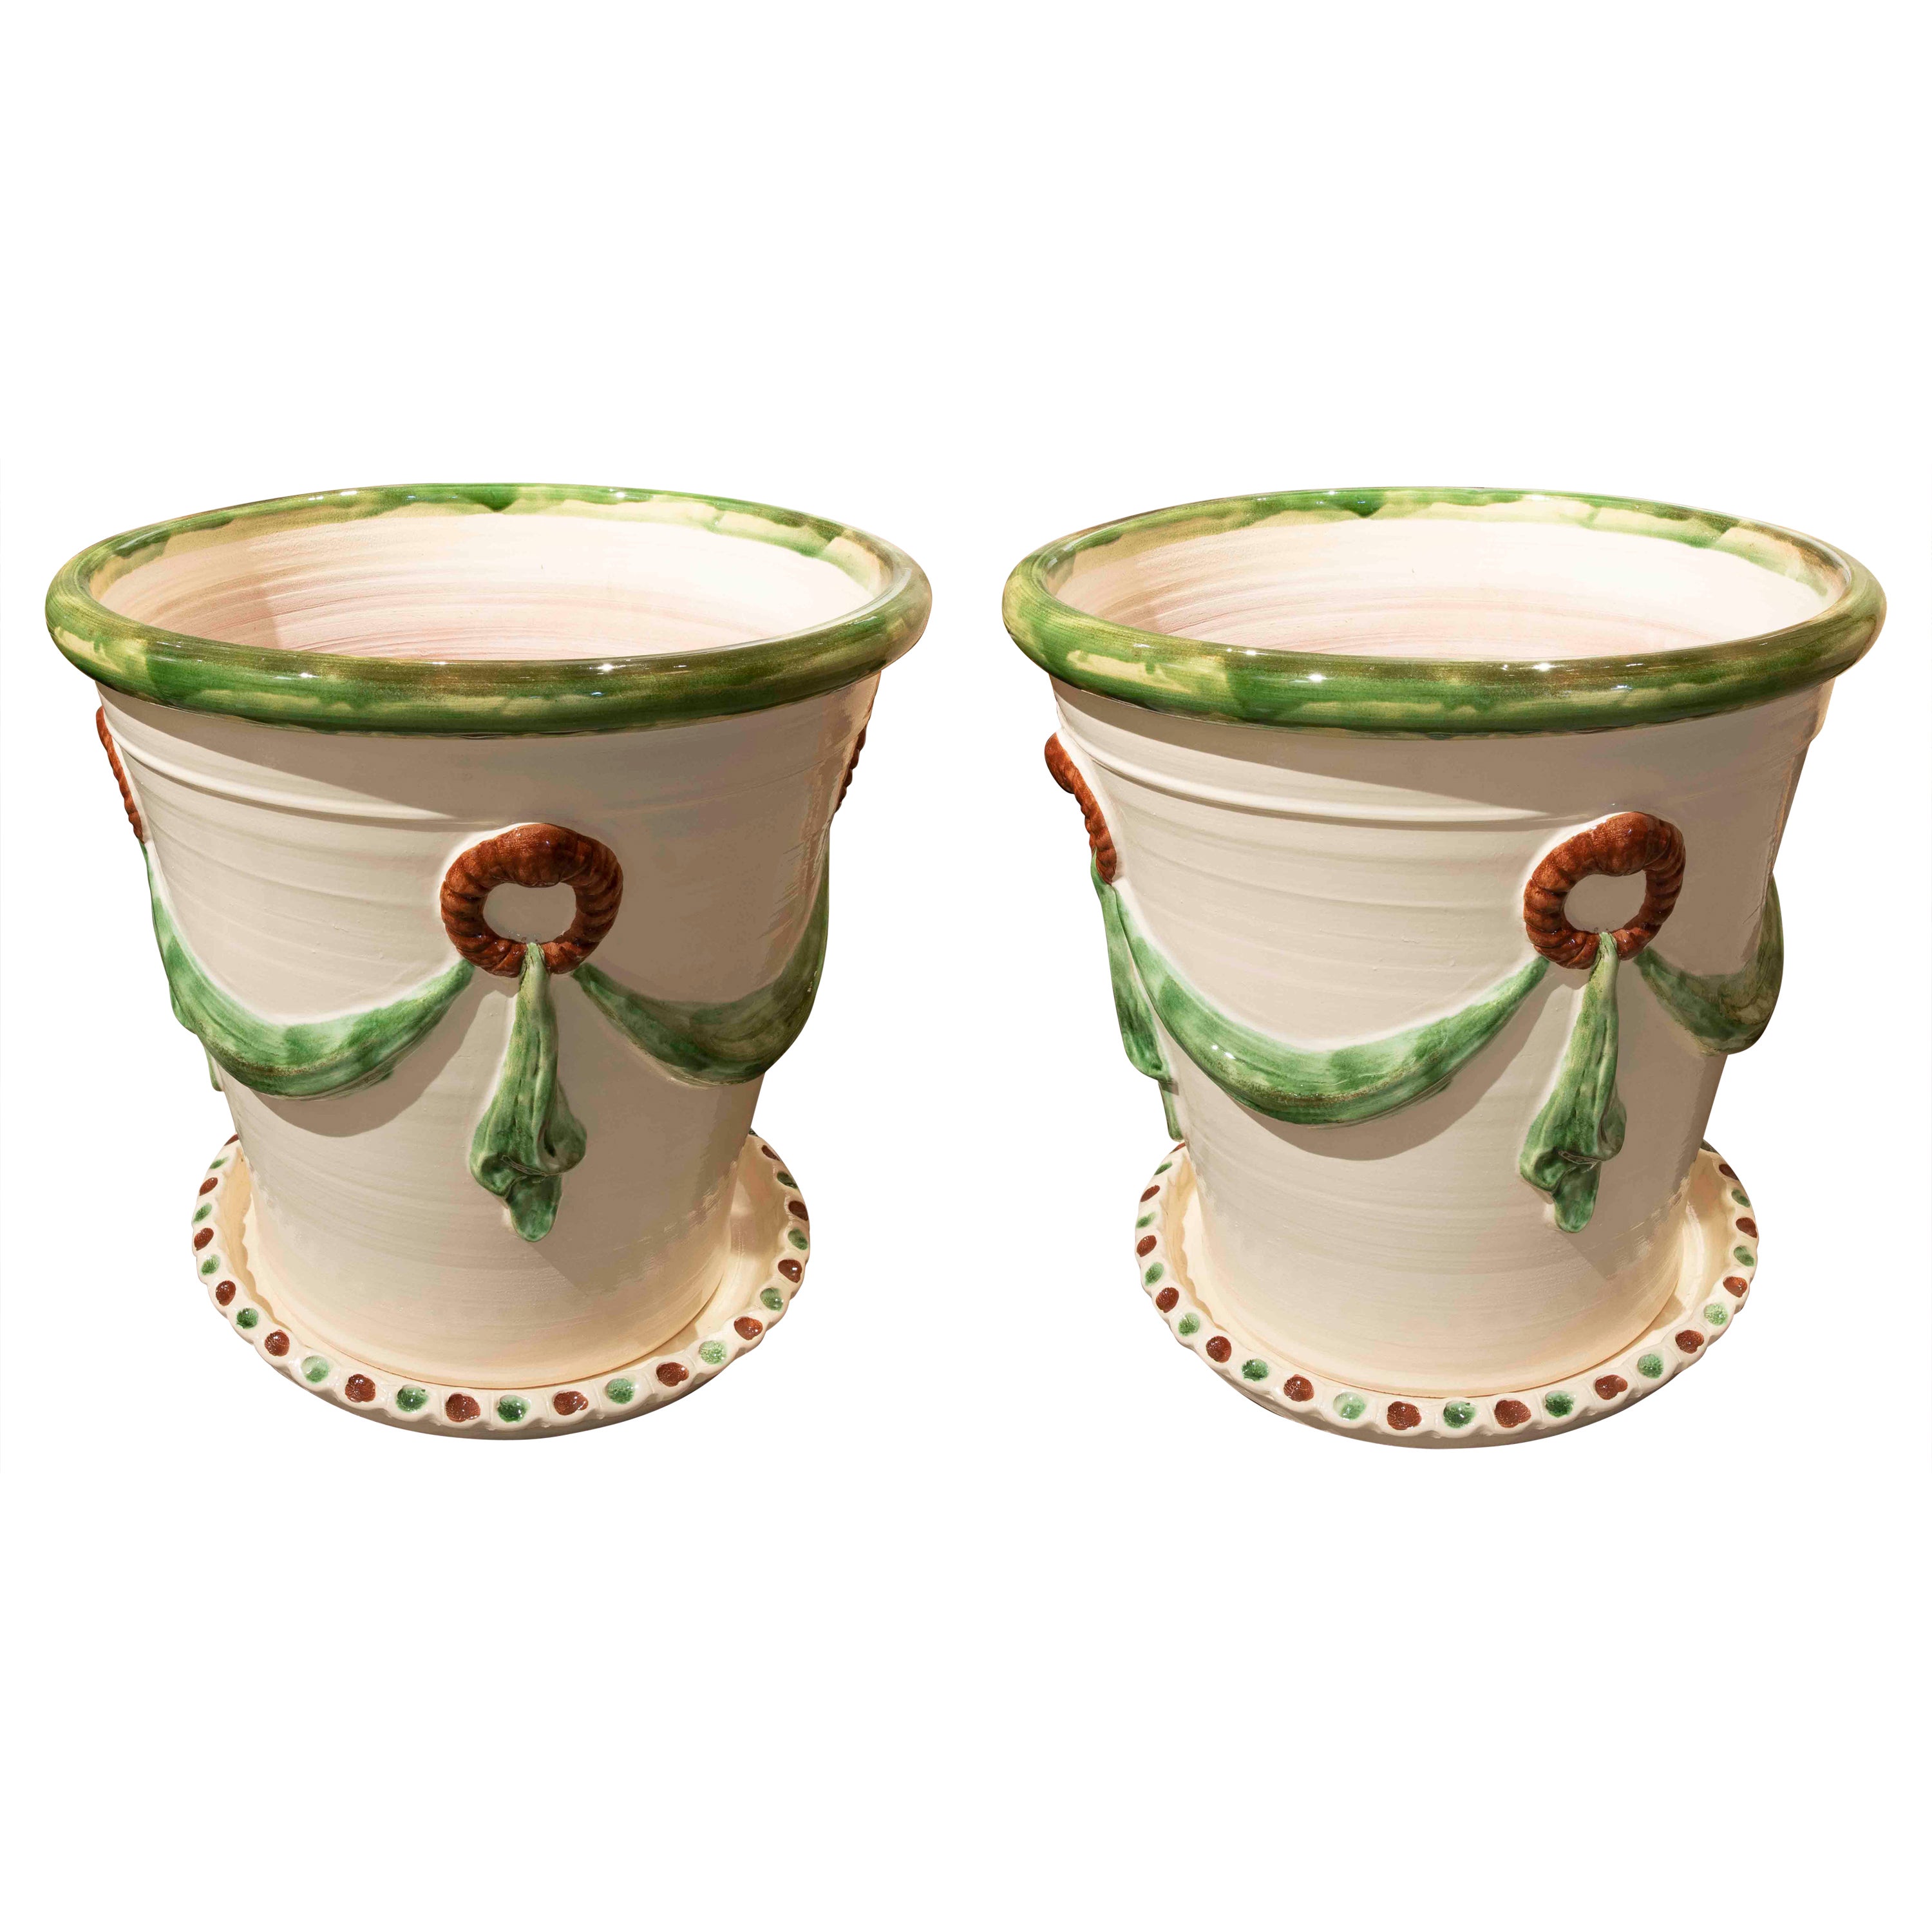 Pair of Granadian Glazed Ceramic Flowerpots with Saucers For Sale